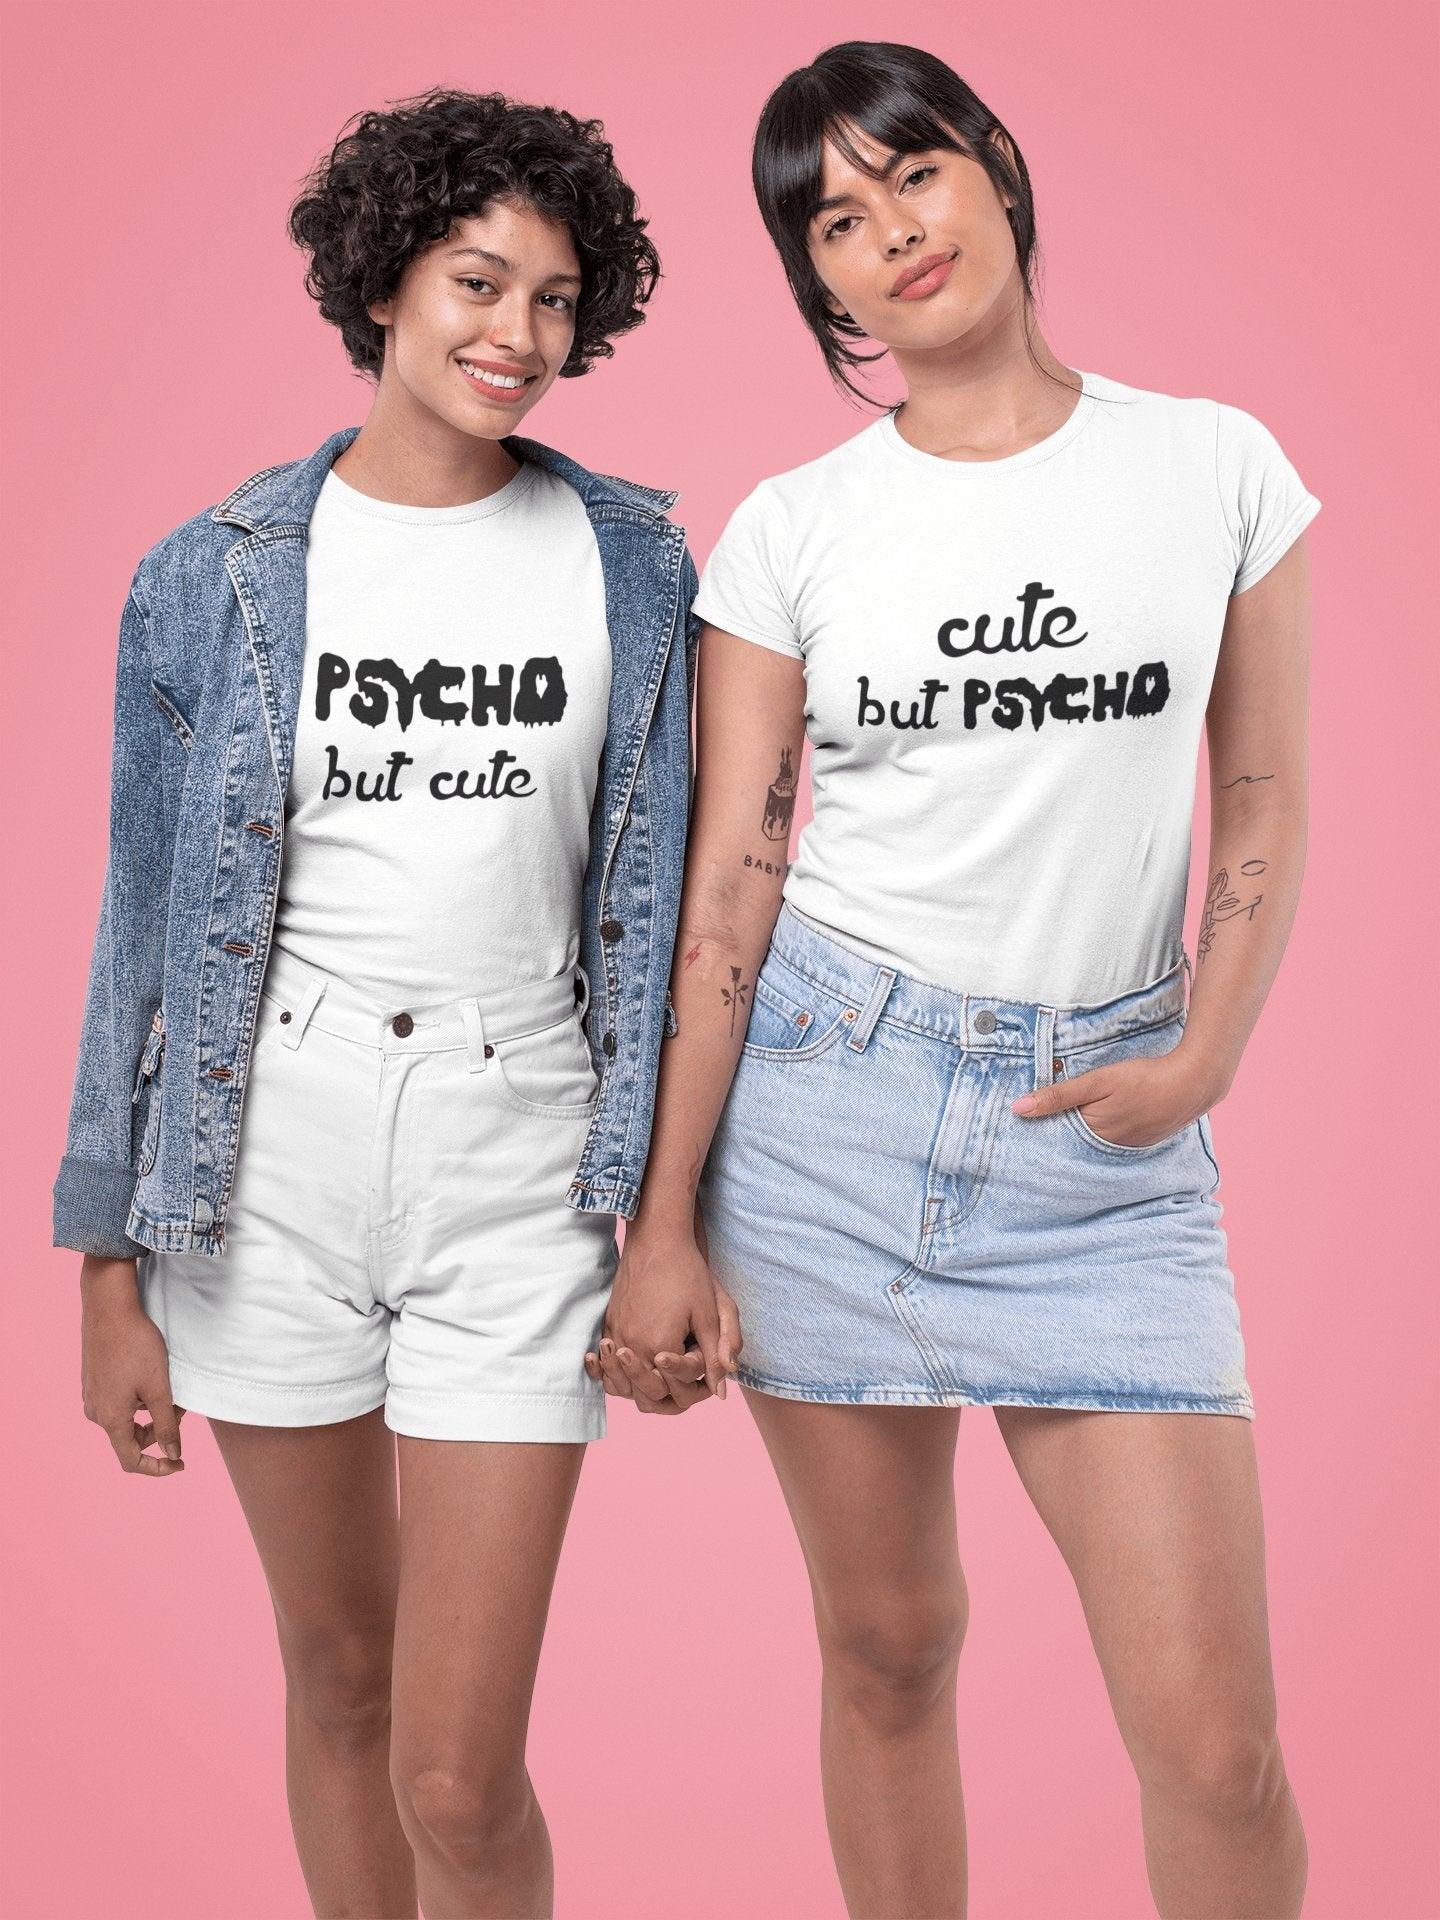 Pride T Shirts For Women In White Colour - Psycho But Cute and Cute But Psycho Variant